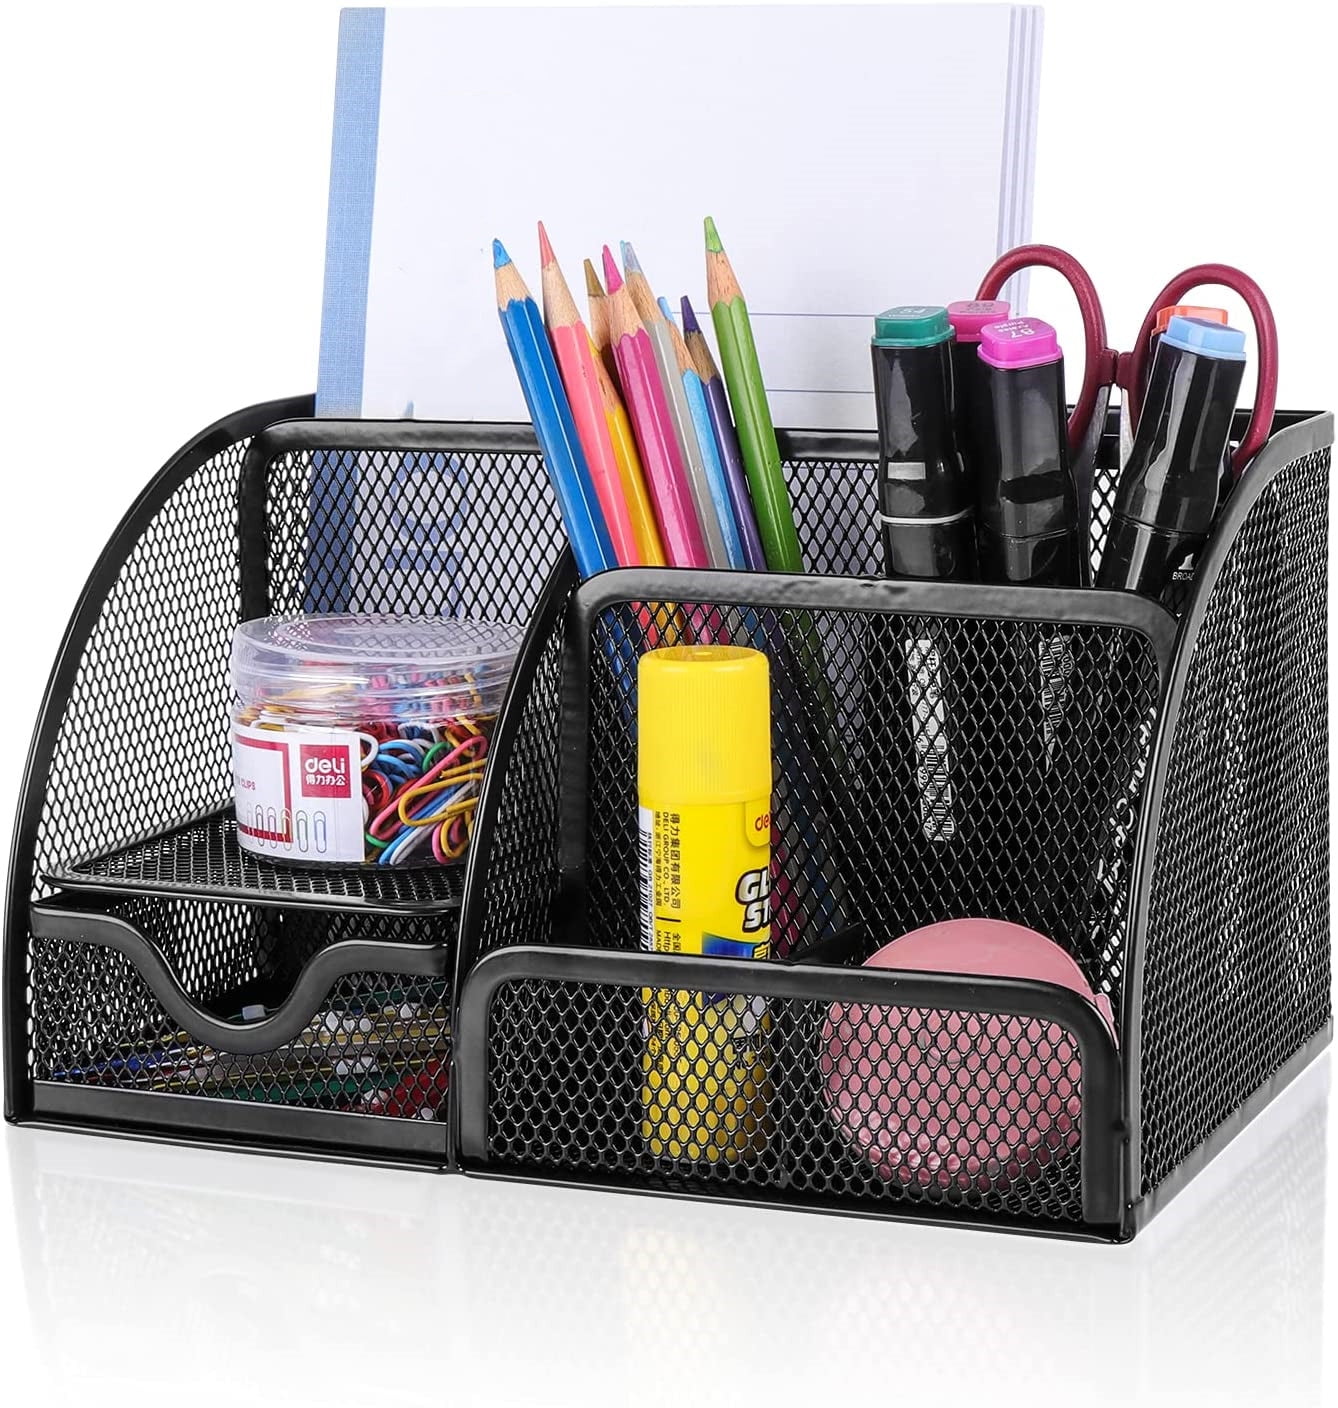 vedett Office Desk Organizer with 6 Compartments + Pen Holder / 72  Accessories, Desk Accessories Organizers for Office, Home, School (Black)